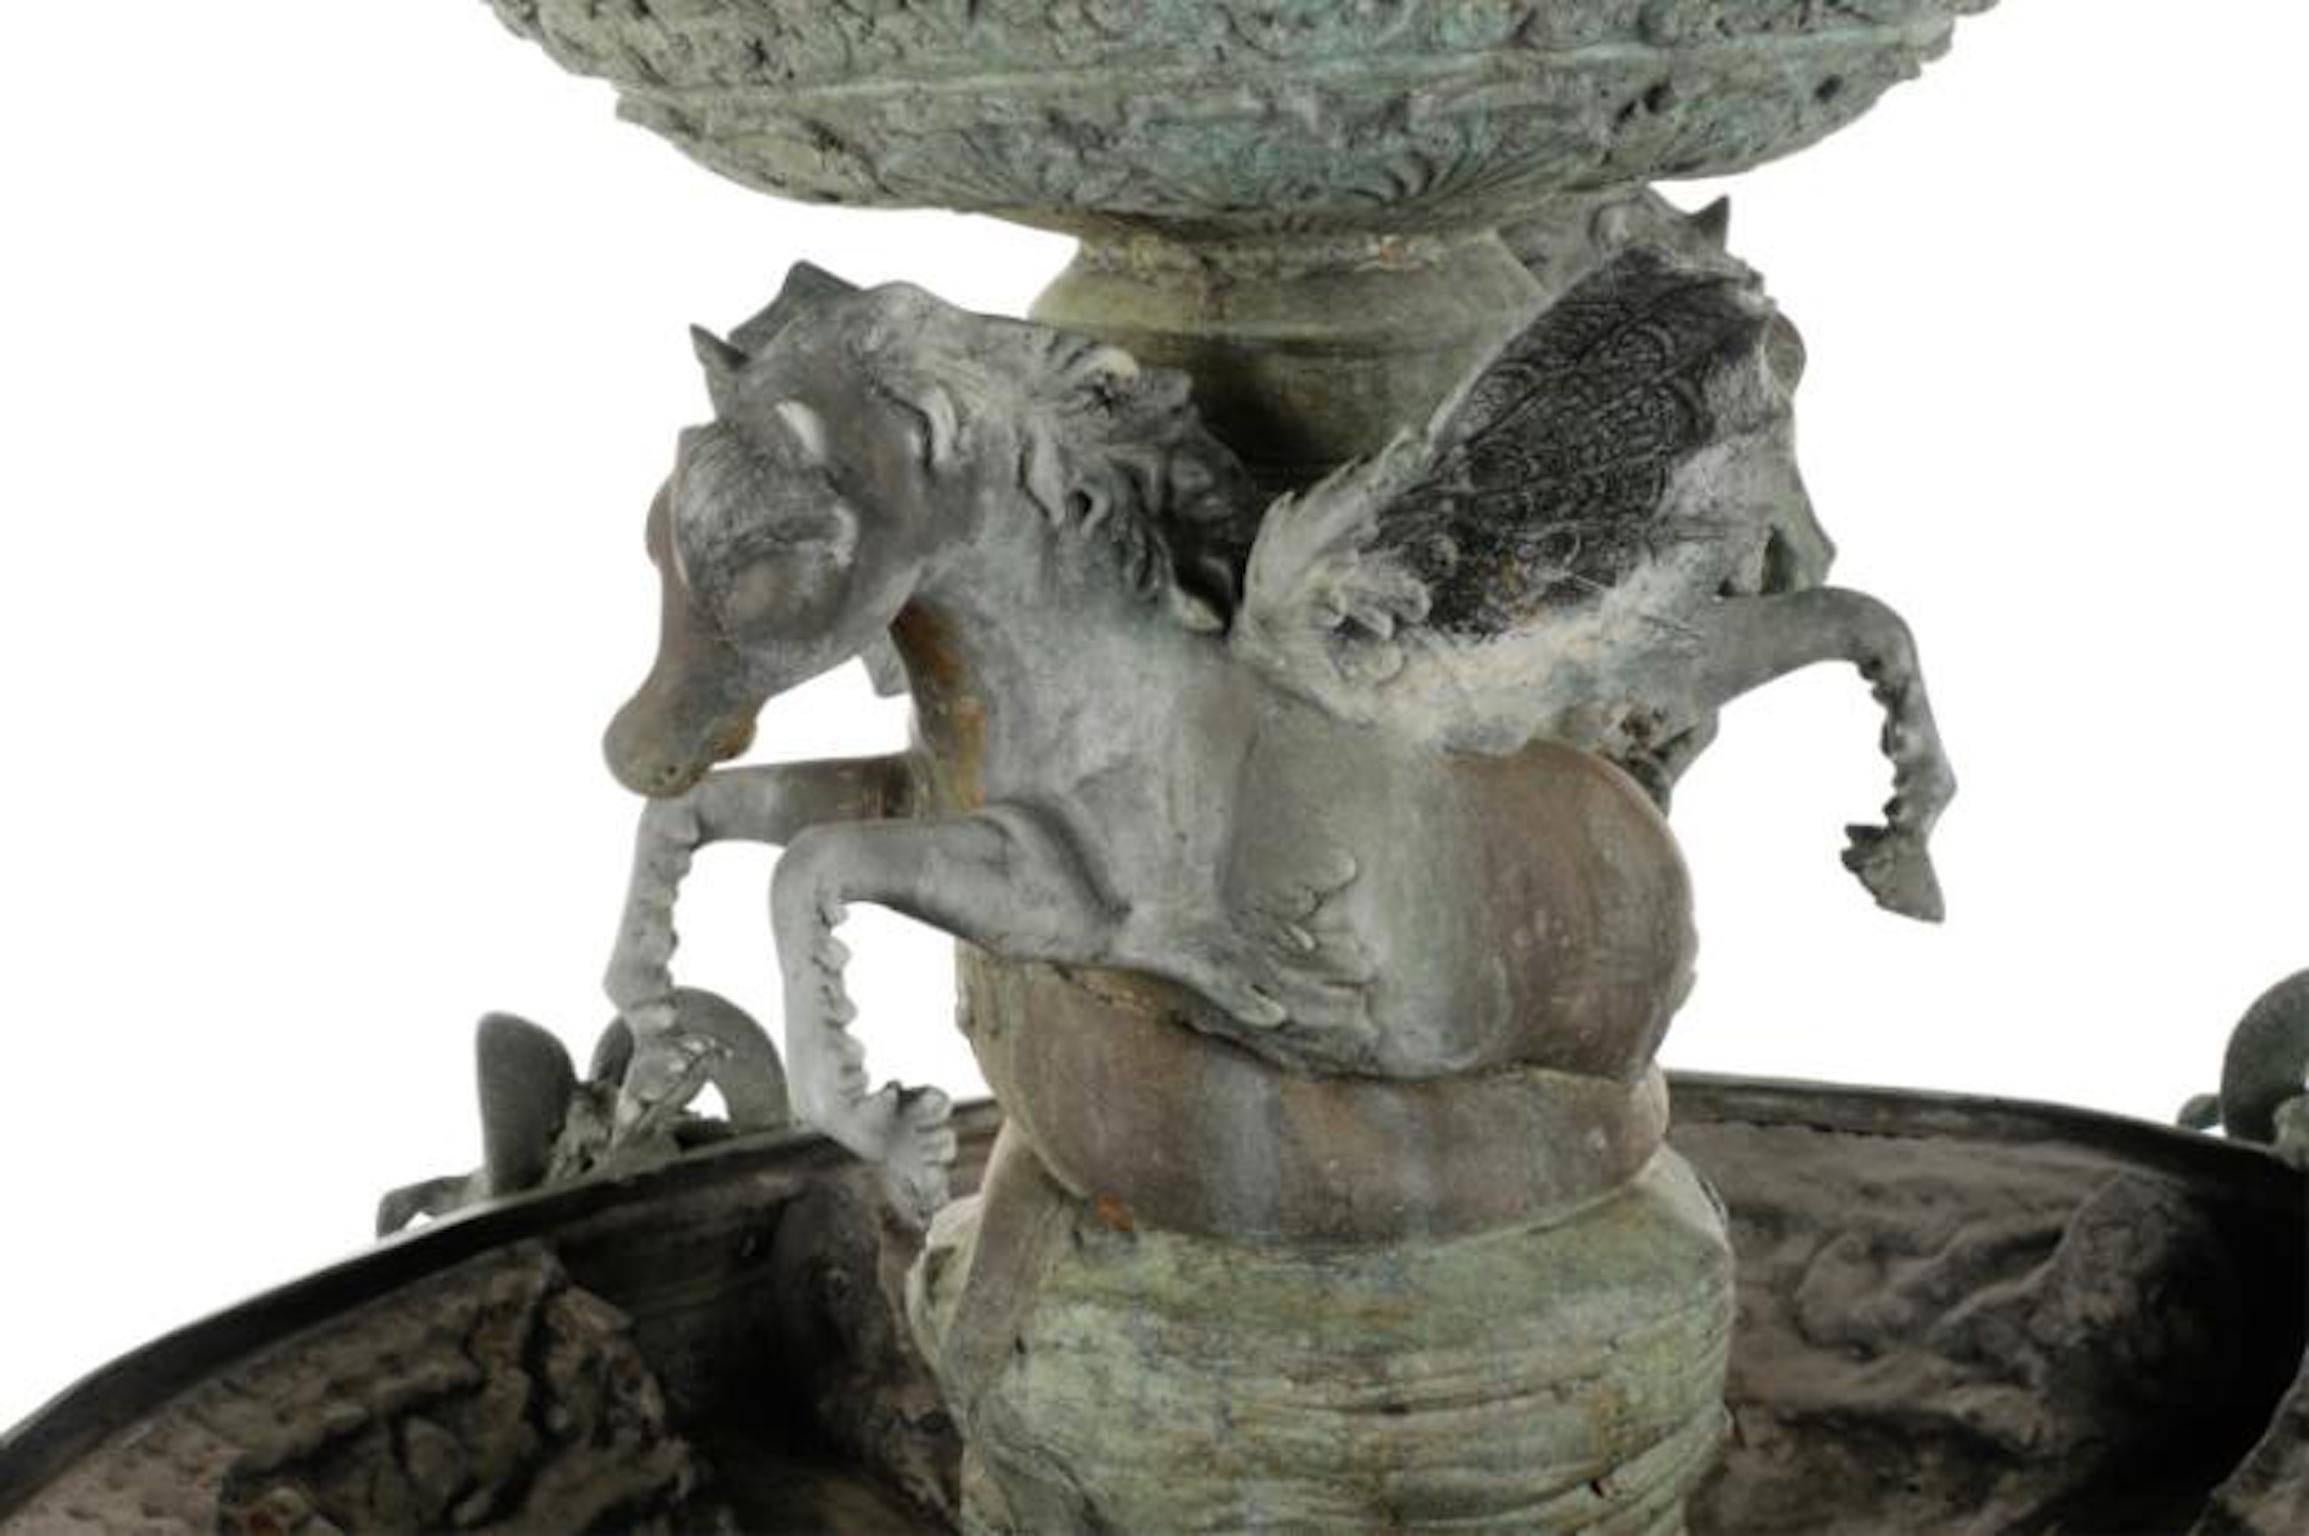 Italian, 20th century. A large Rococo style bronze garden fountain with an all-over verdigris patina, having two tiers, the upper with a putto riding a grotesque dolphin, supported by two intertwined Pegasus figures, the lower tier gadrooned and